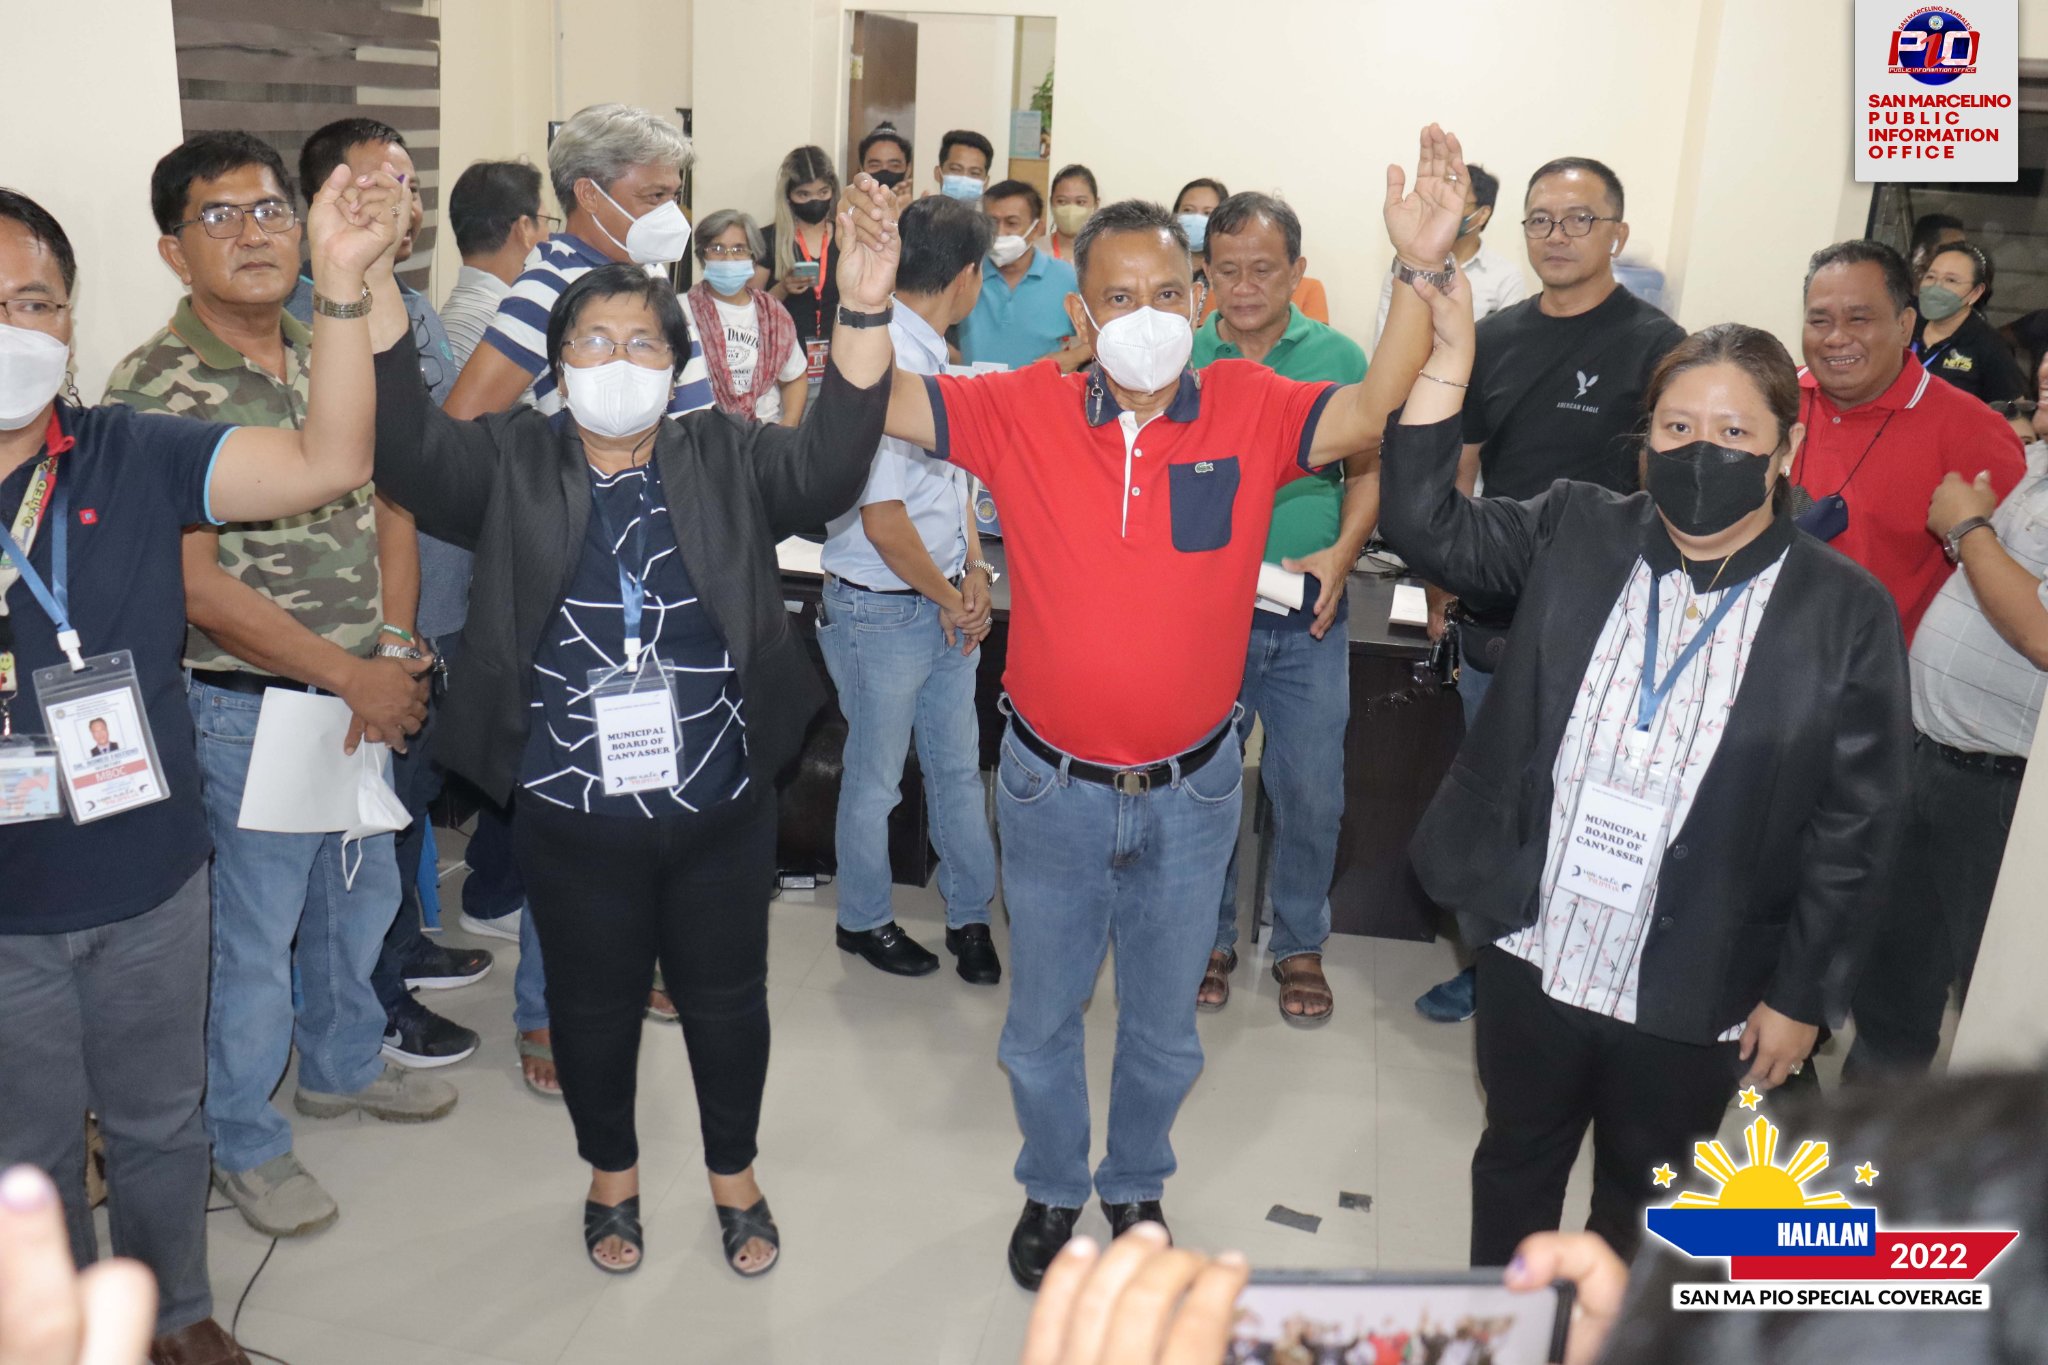 Mayor-elect Elmer "Elvis" Ragadio Soria (in red shirt)) of San Marcelino town, Zambales province is being proclaimed by Comelec officials